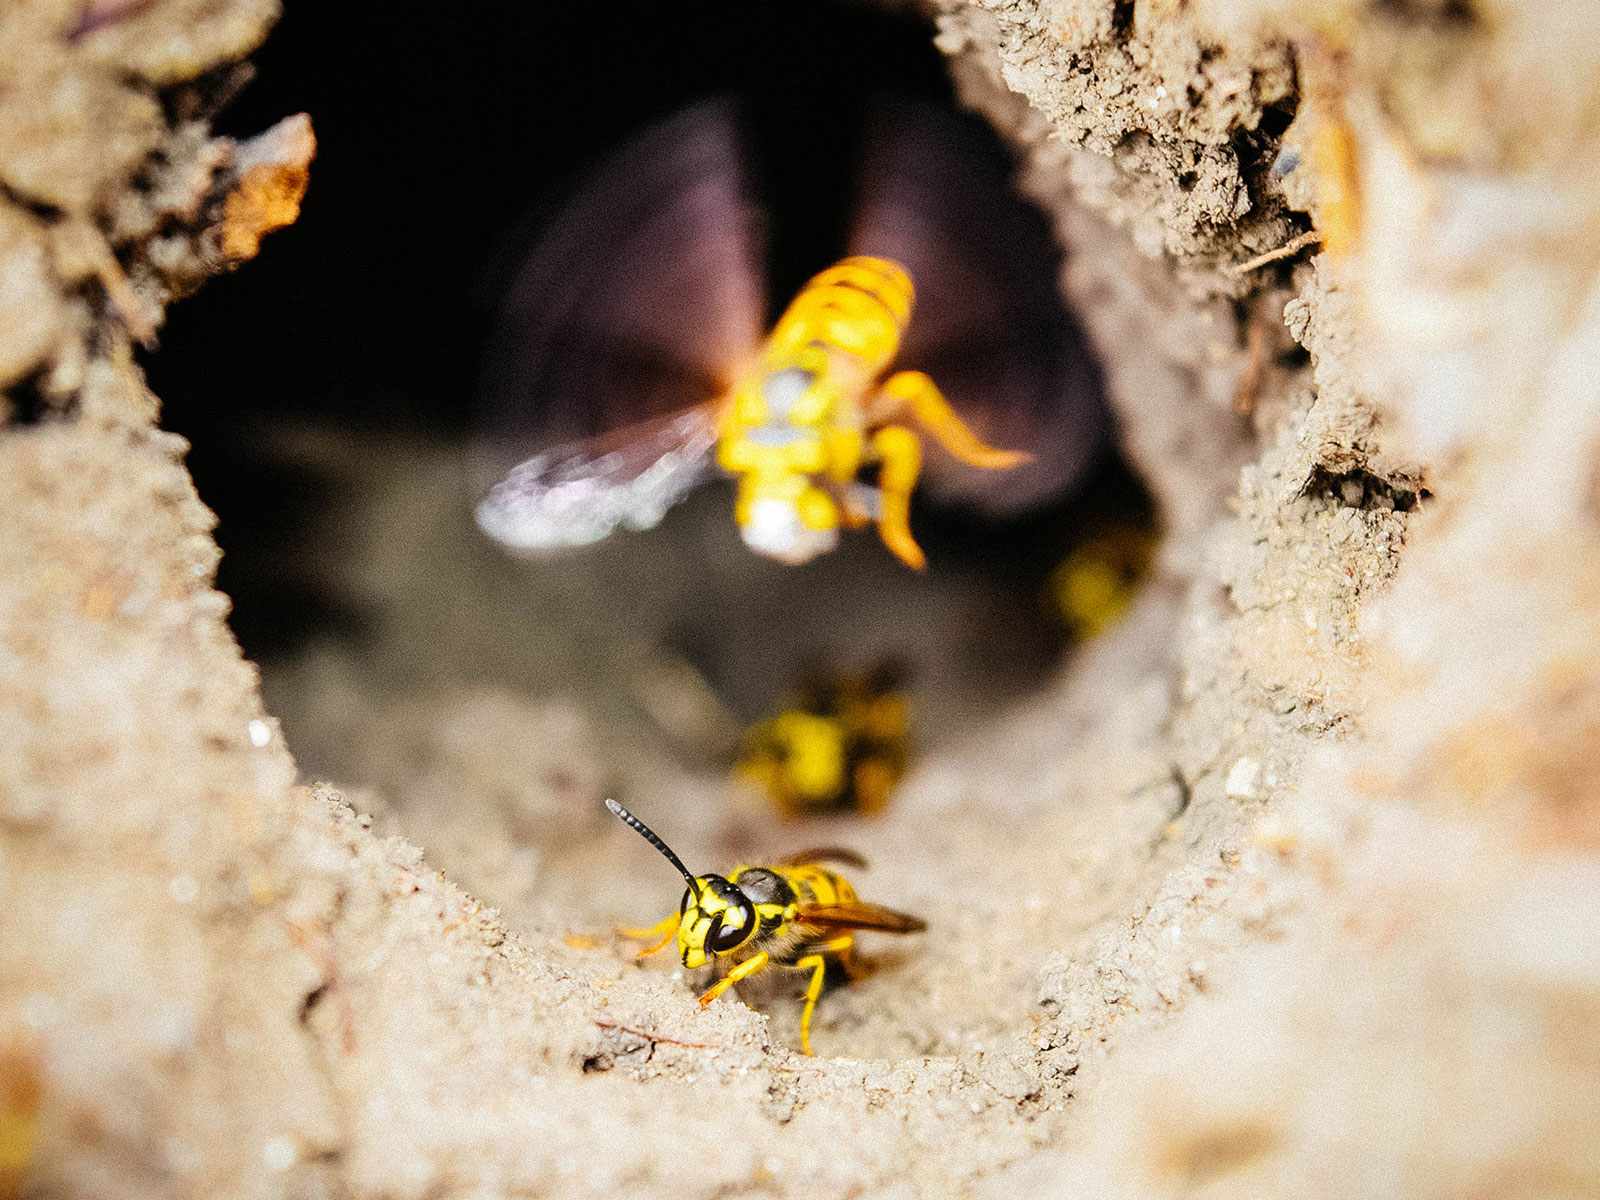 Wasps flying out of a wasp nest